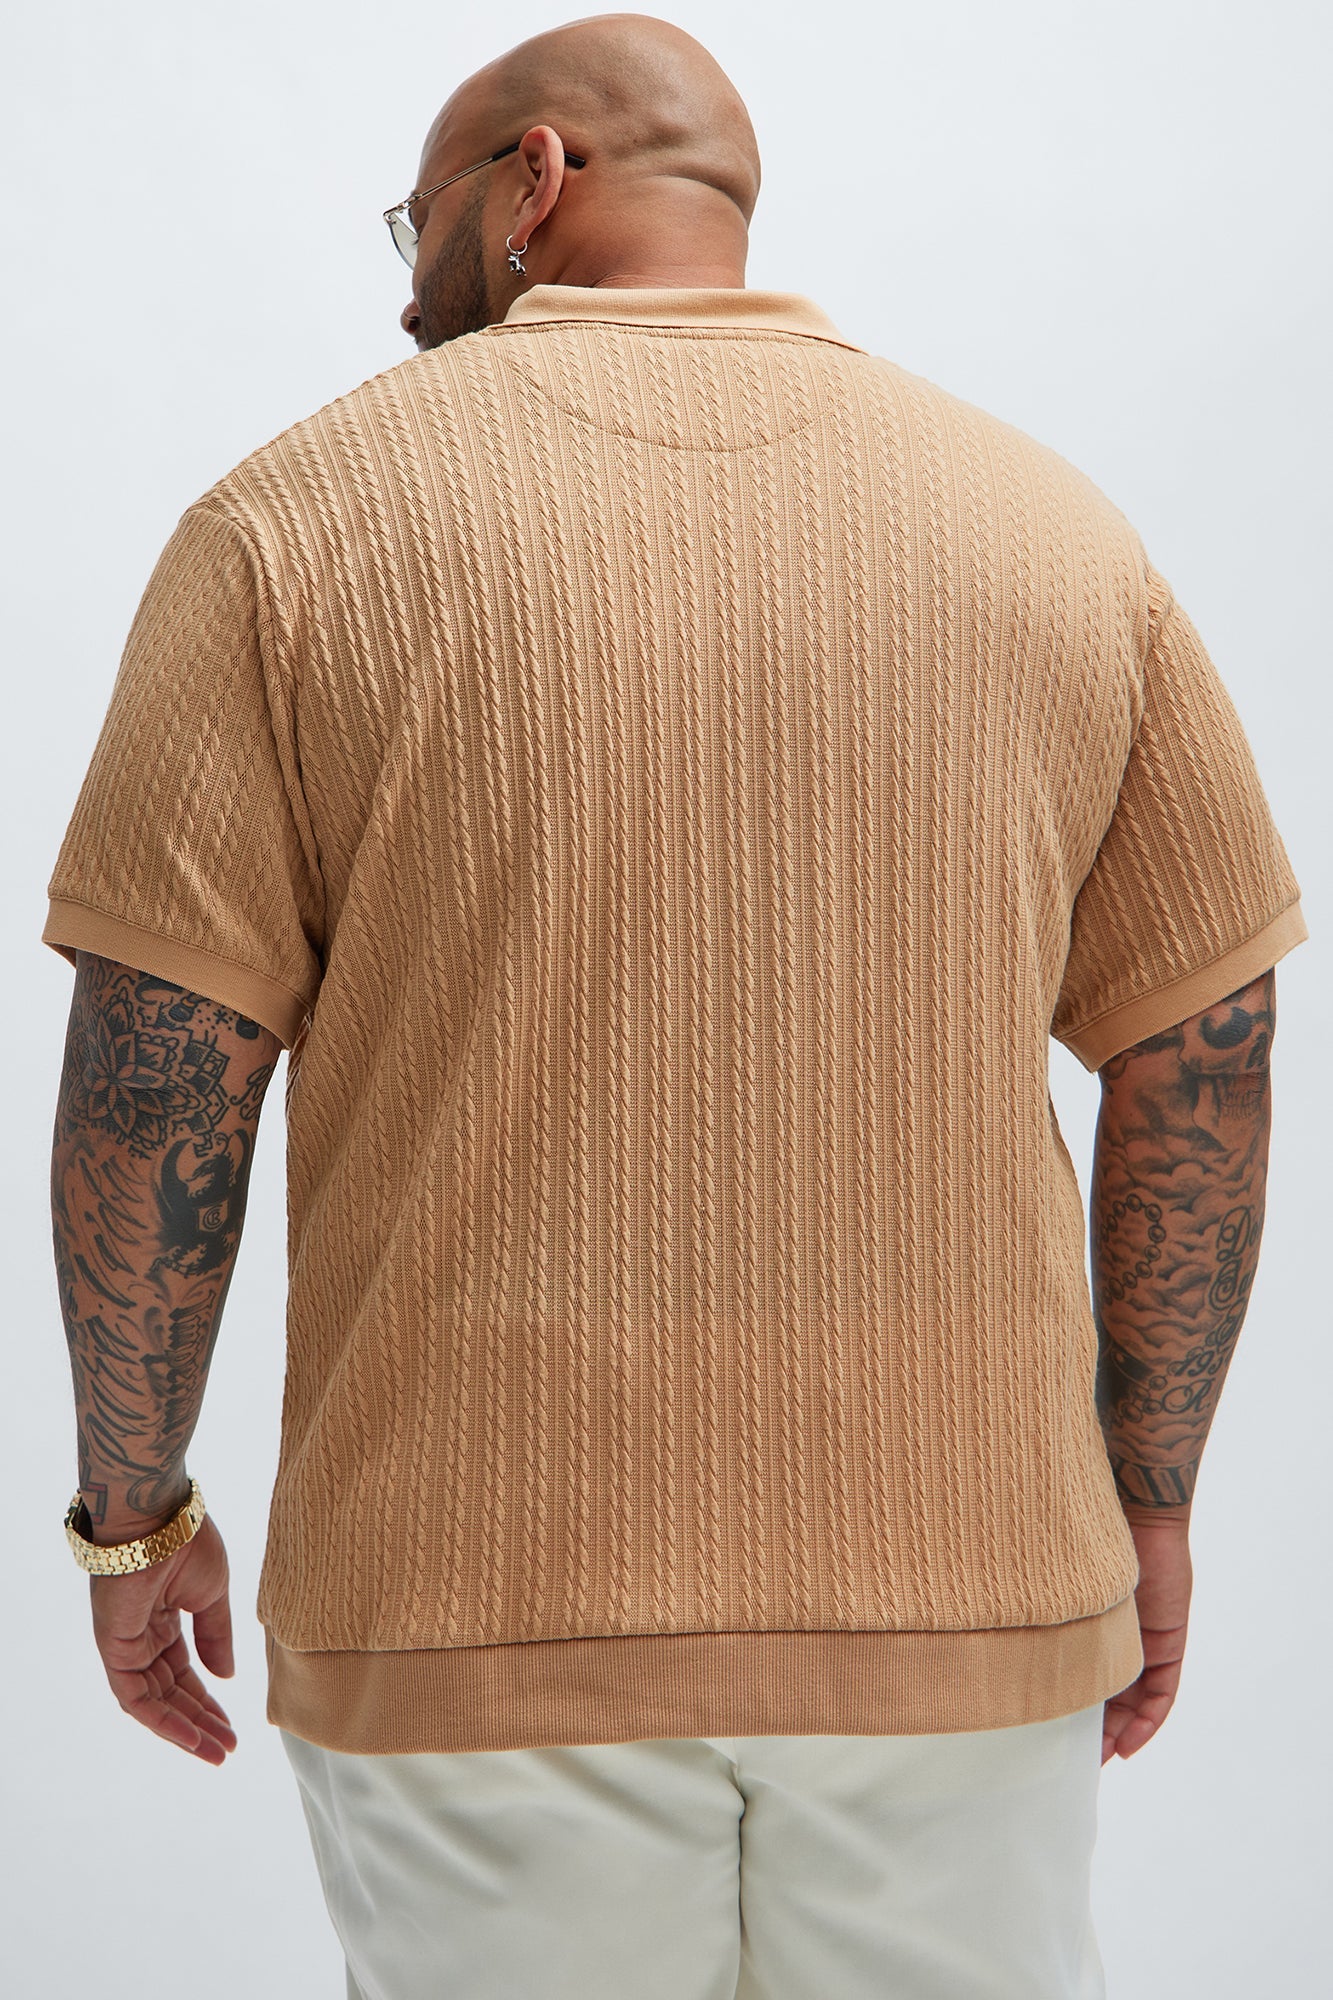 Go-To Polo: Caddie Short Sleeve in Light Brown